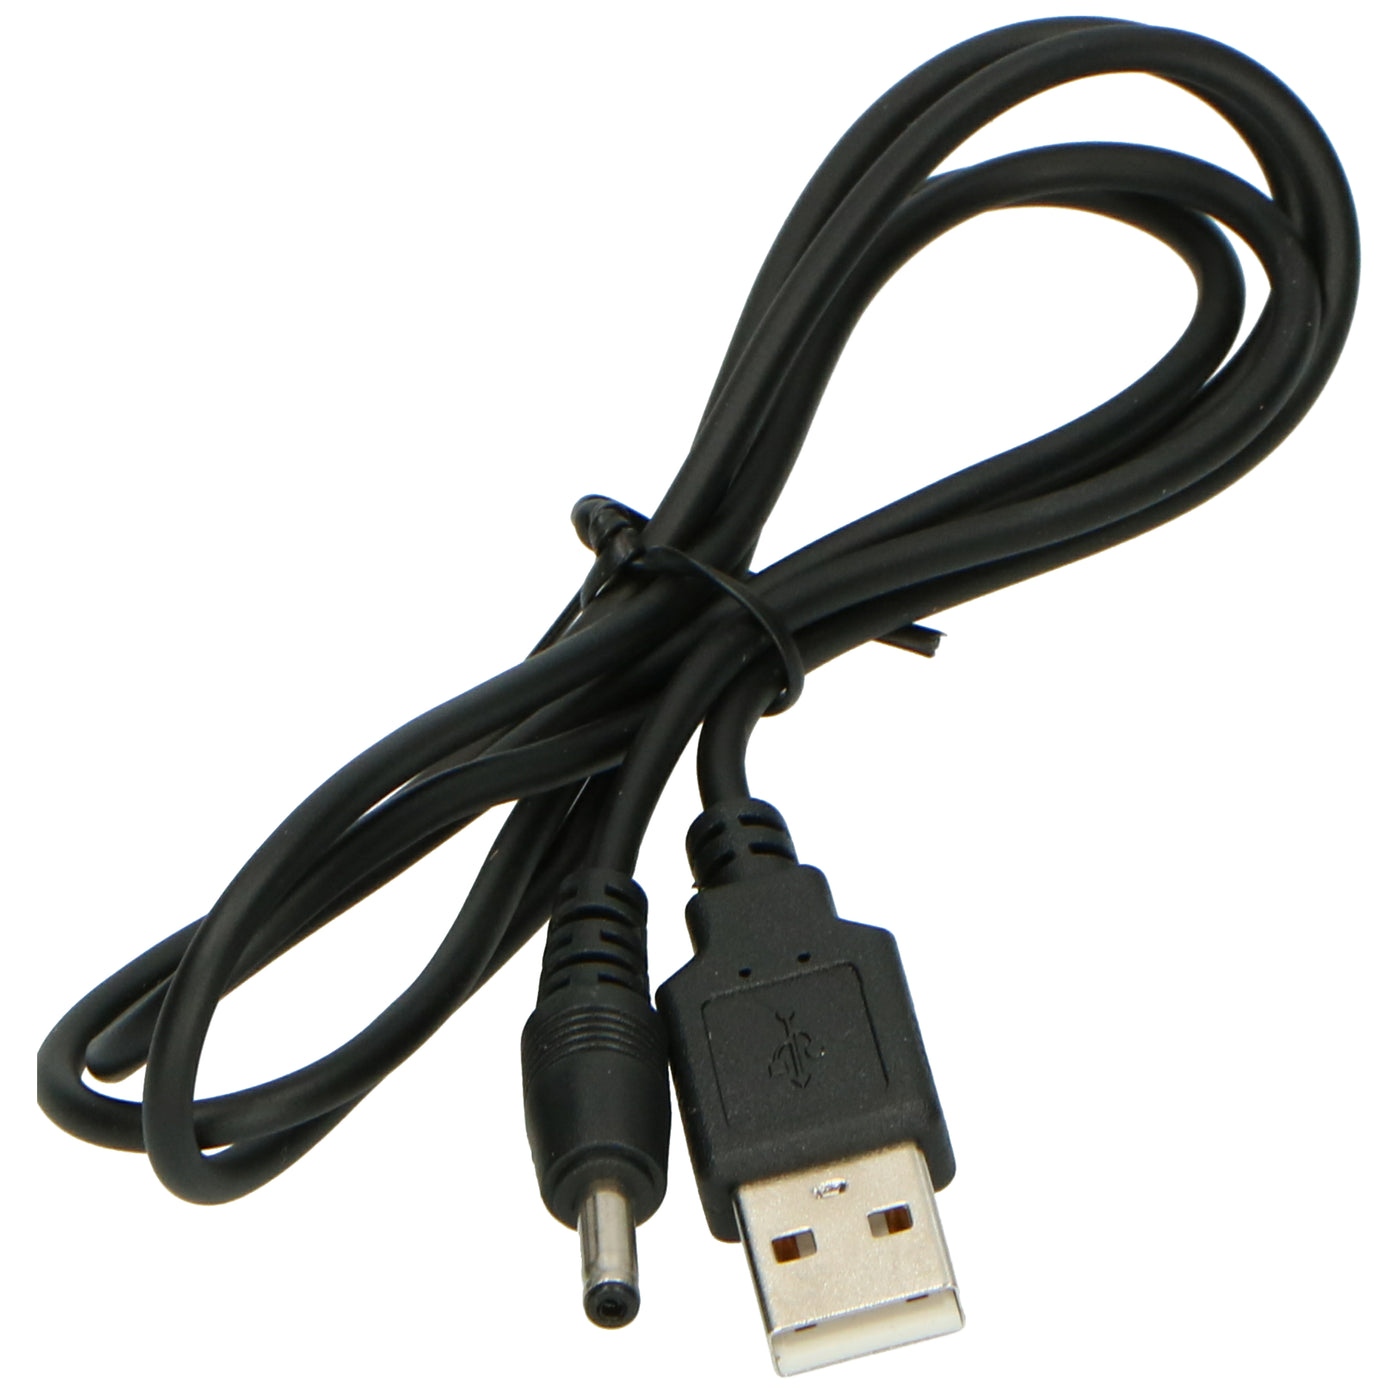 P001357 - USB-charge cable voor CD-010 en CD-200